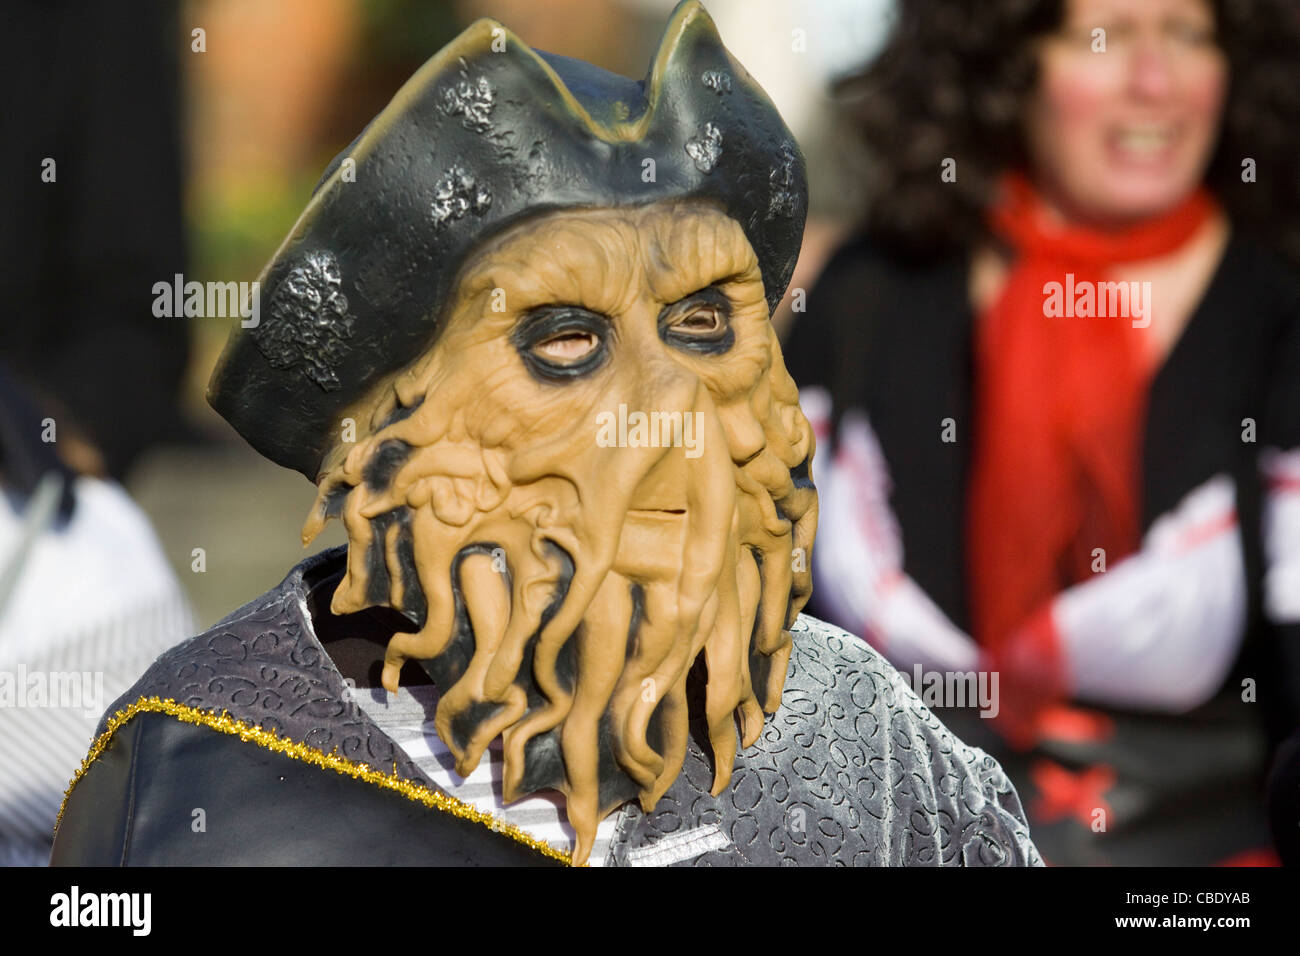 Child Dressed up as Davy Jones from the Pirates of the Caribbean for the  Disney Christmas Parade in Buckingham Stock Photo - Alamy